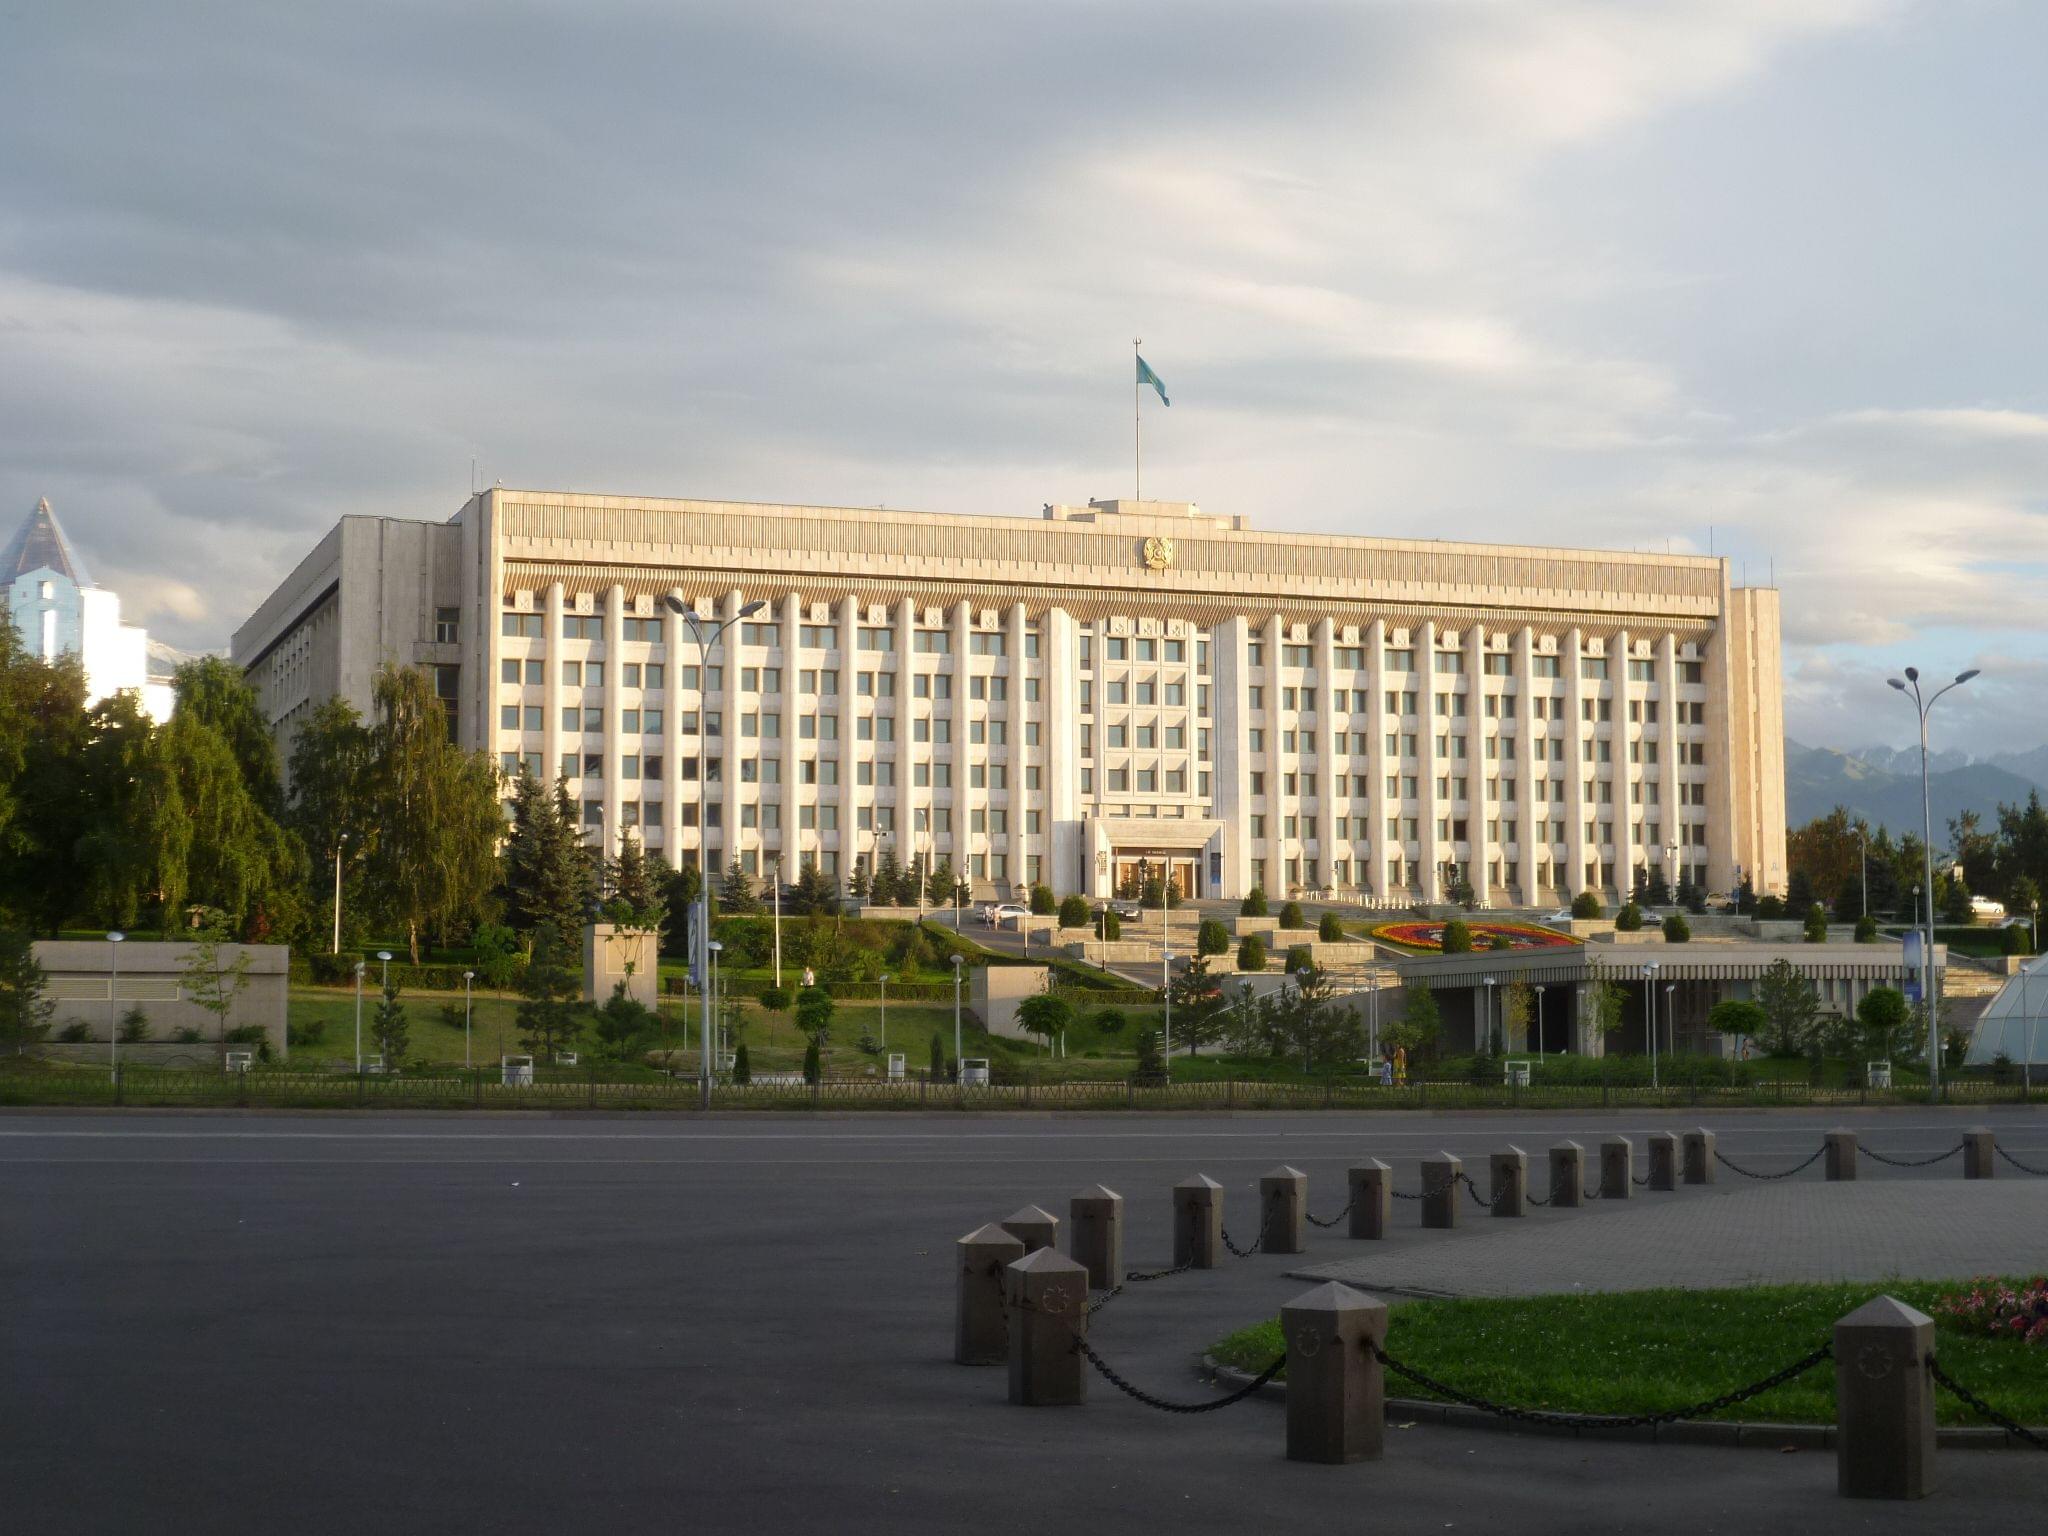 Palace of President Almaty Overview